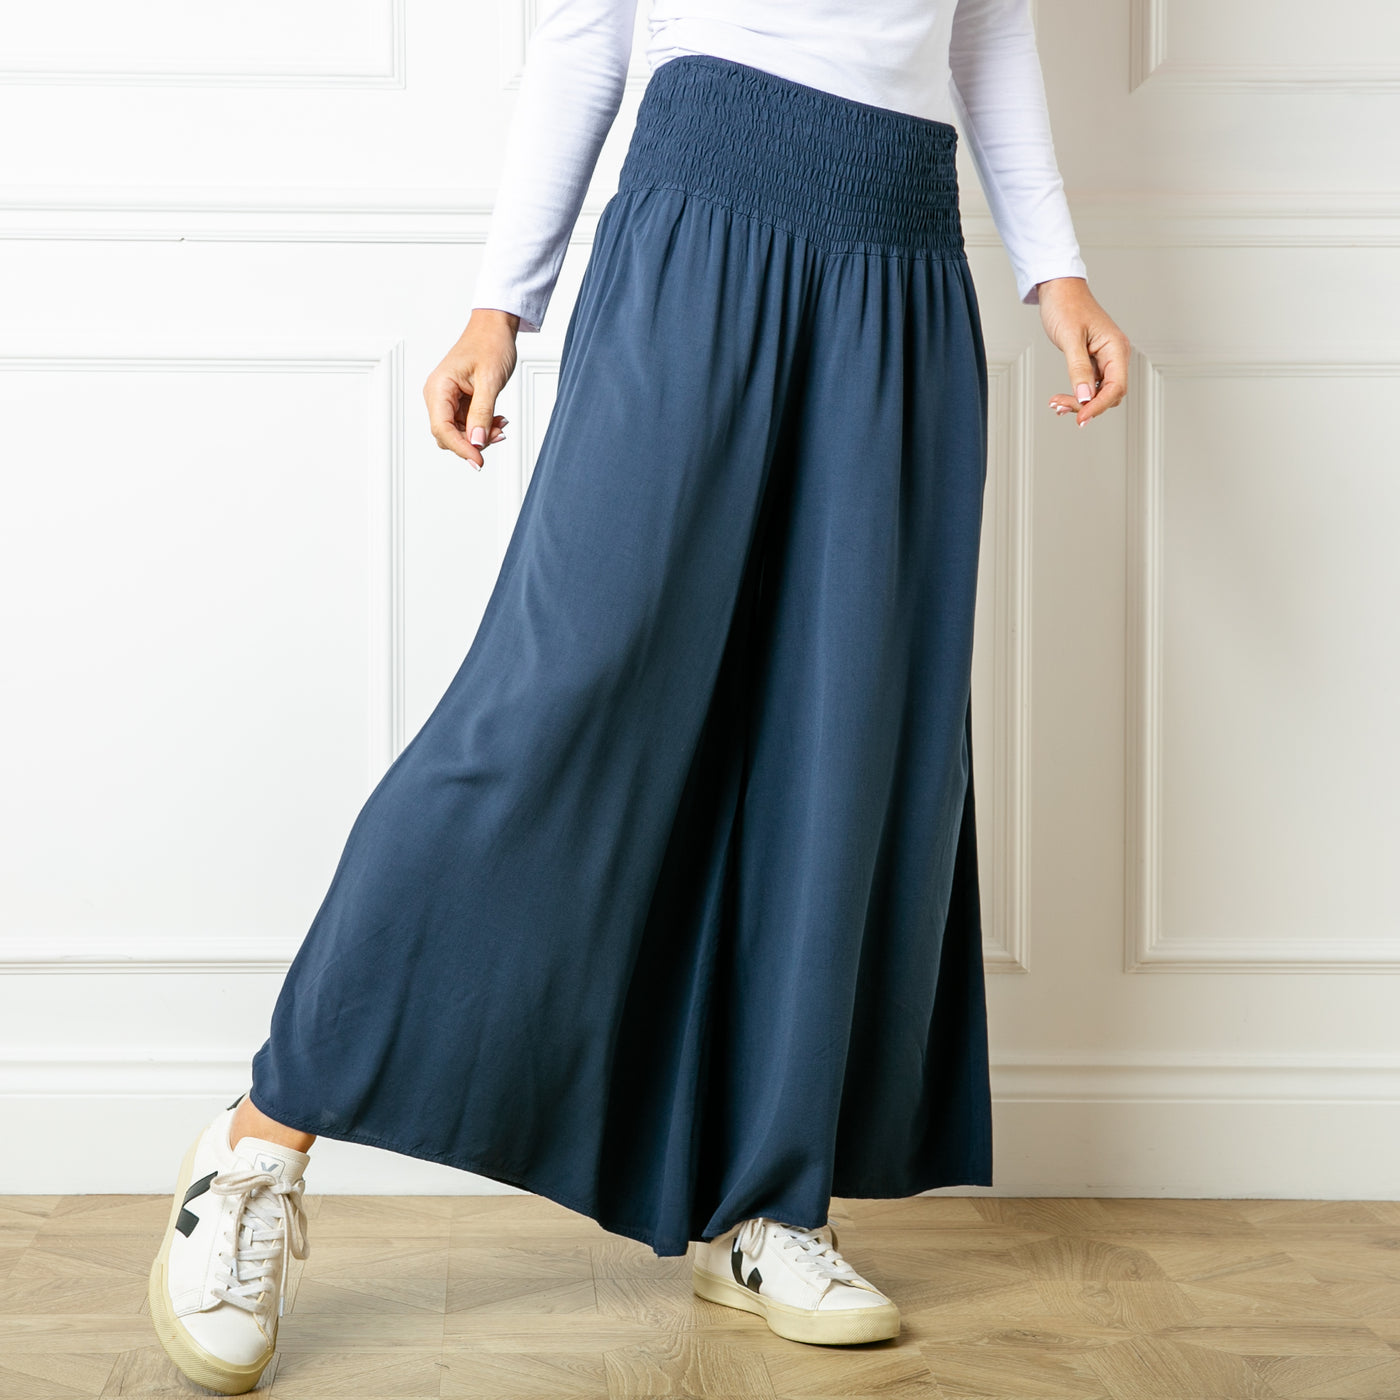 The navy blue Shirred Waist Wide Leg Trousers with a relaxed loose fitting silhouette around the legs